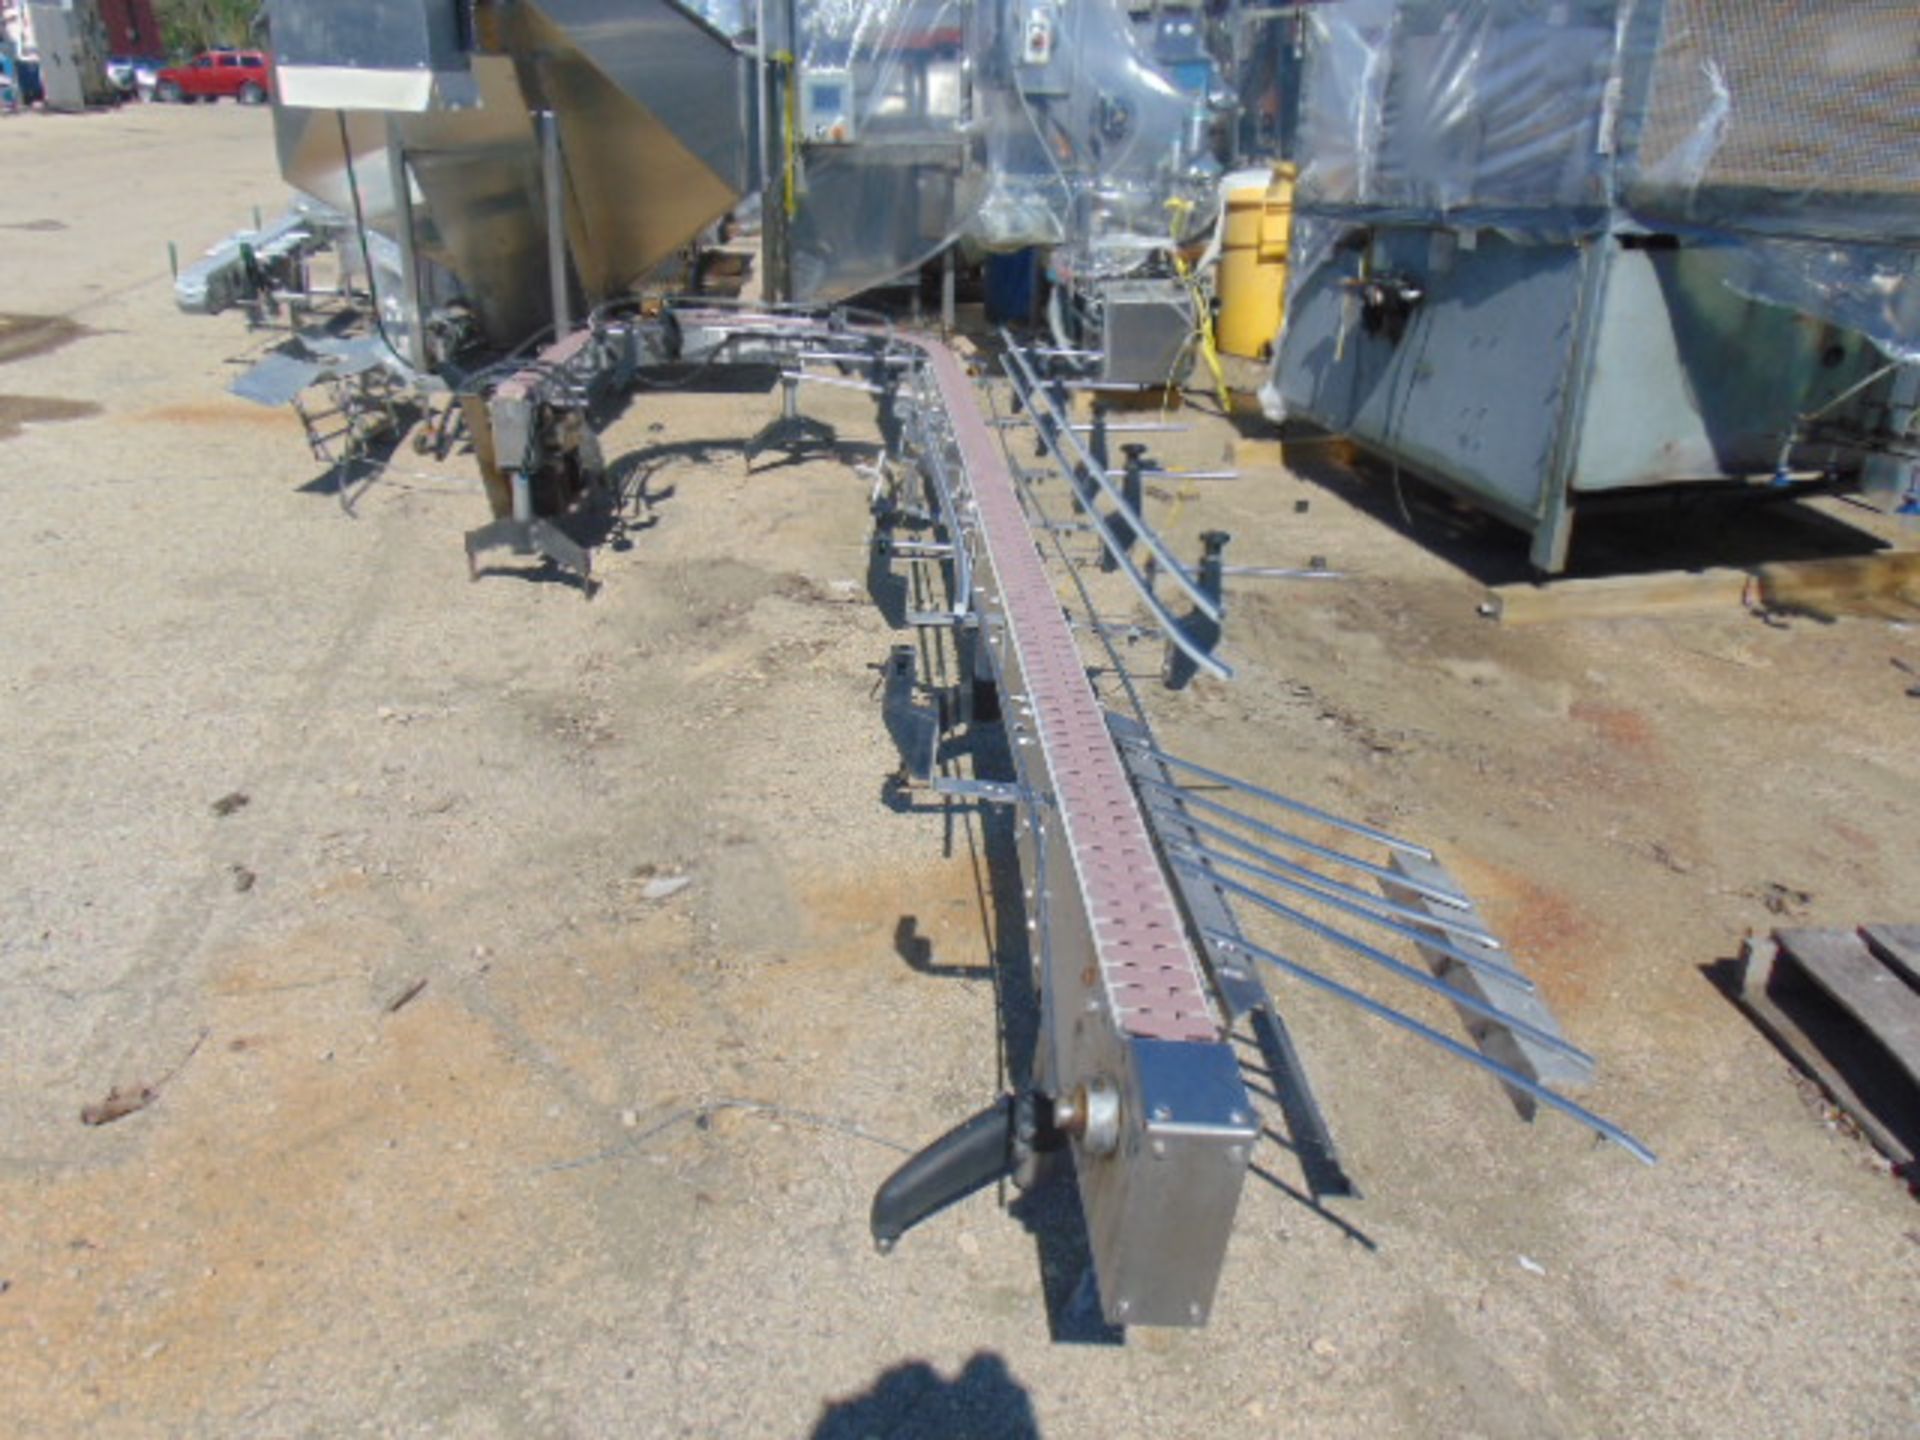 4.5" Wide S/S Plastic Table Top Conveyor System 21' Long Mfg. by Multi Conveyor LLC, Includes 180